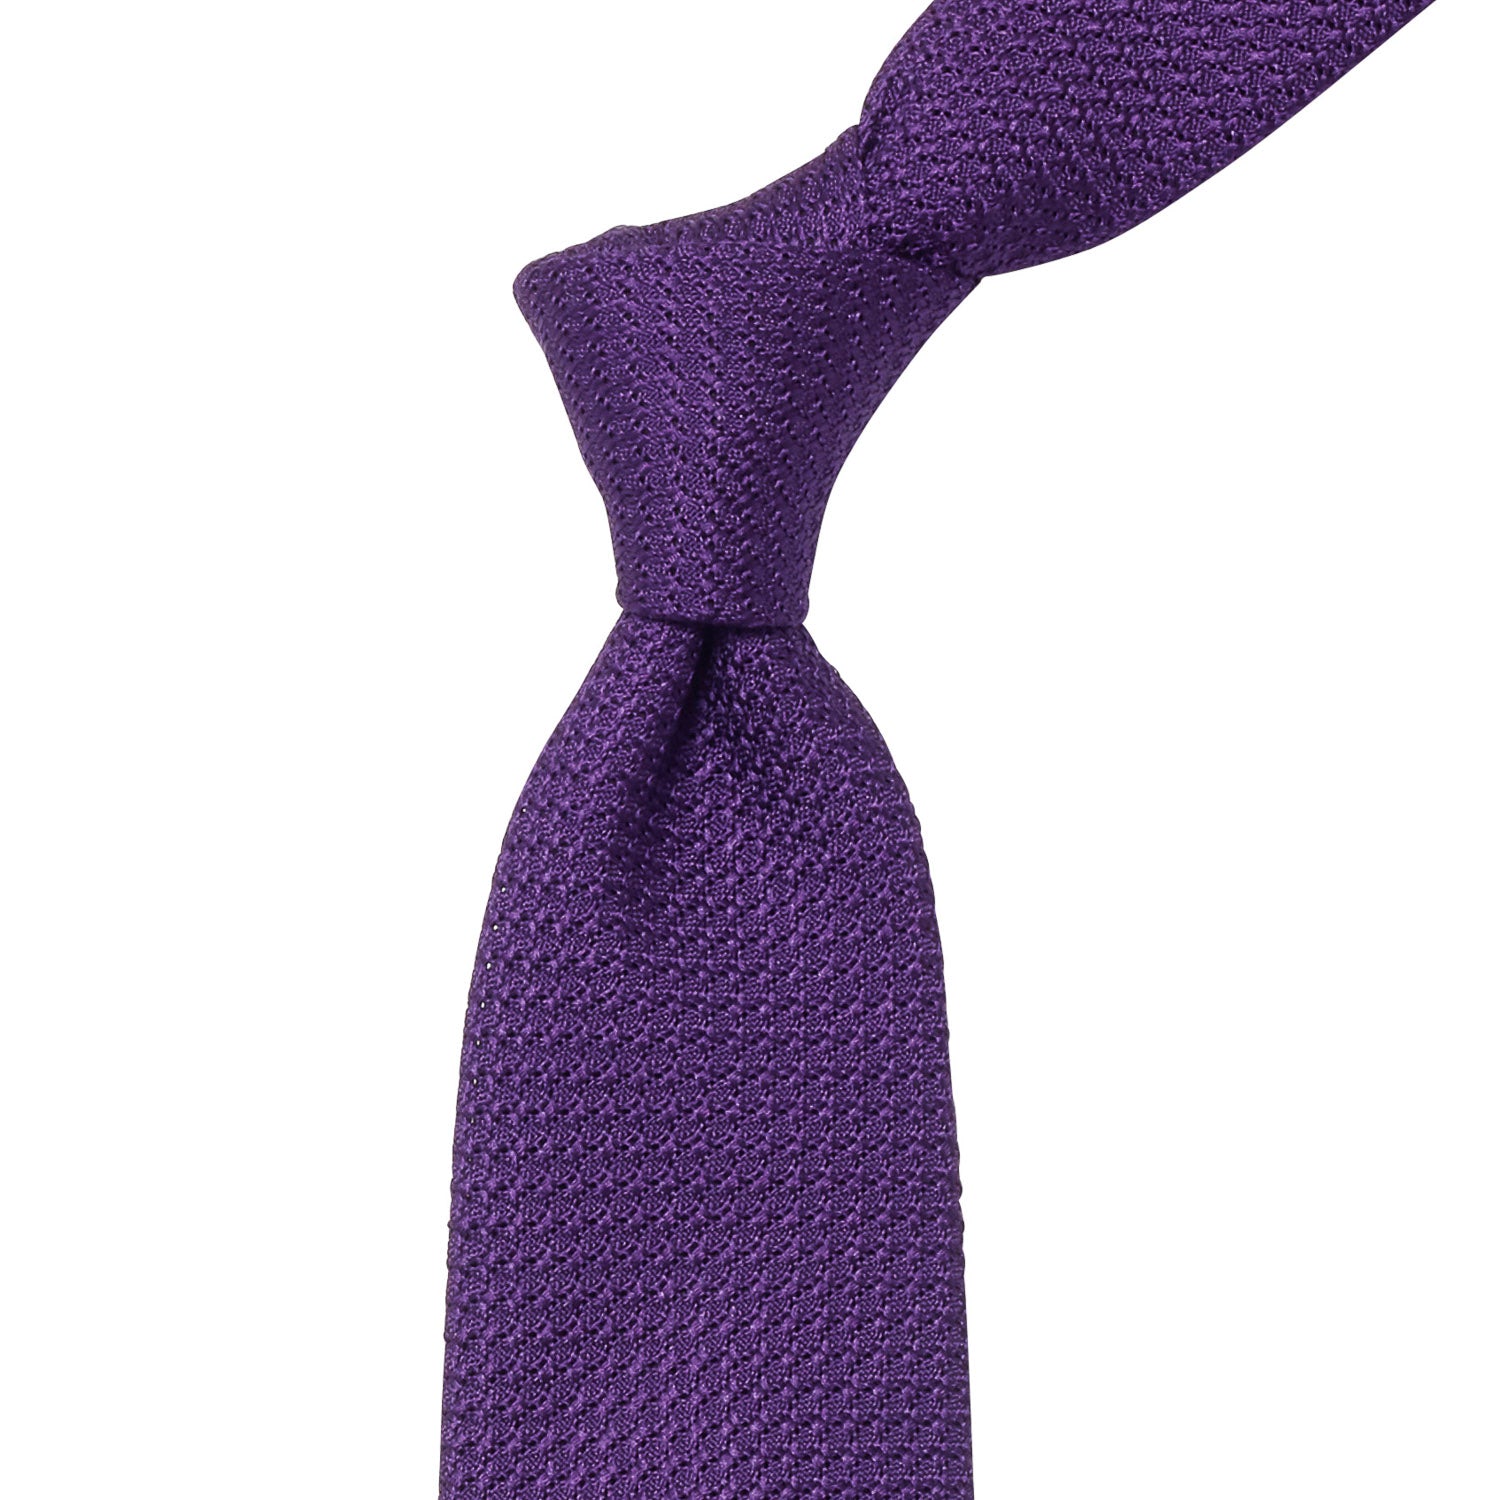 A Sovereign Grade Purple Grenadine Grossa Tie handcrafted in the United Kingdom by KirbyAllison.com.